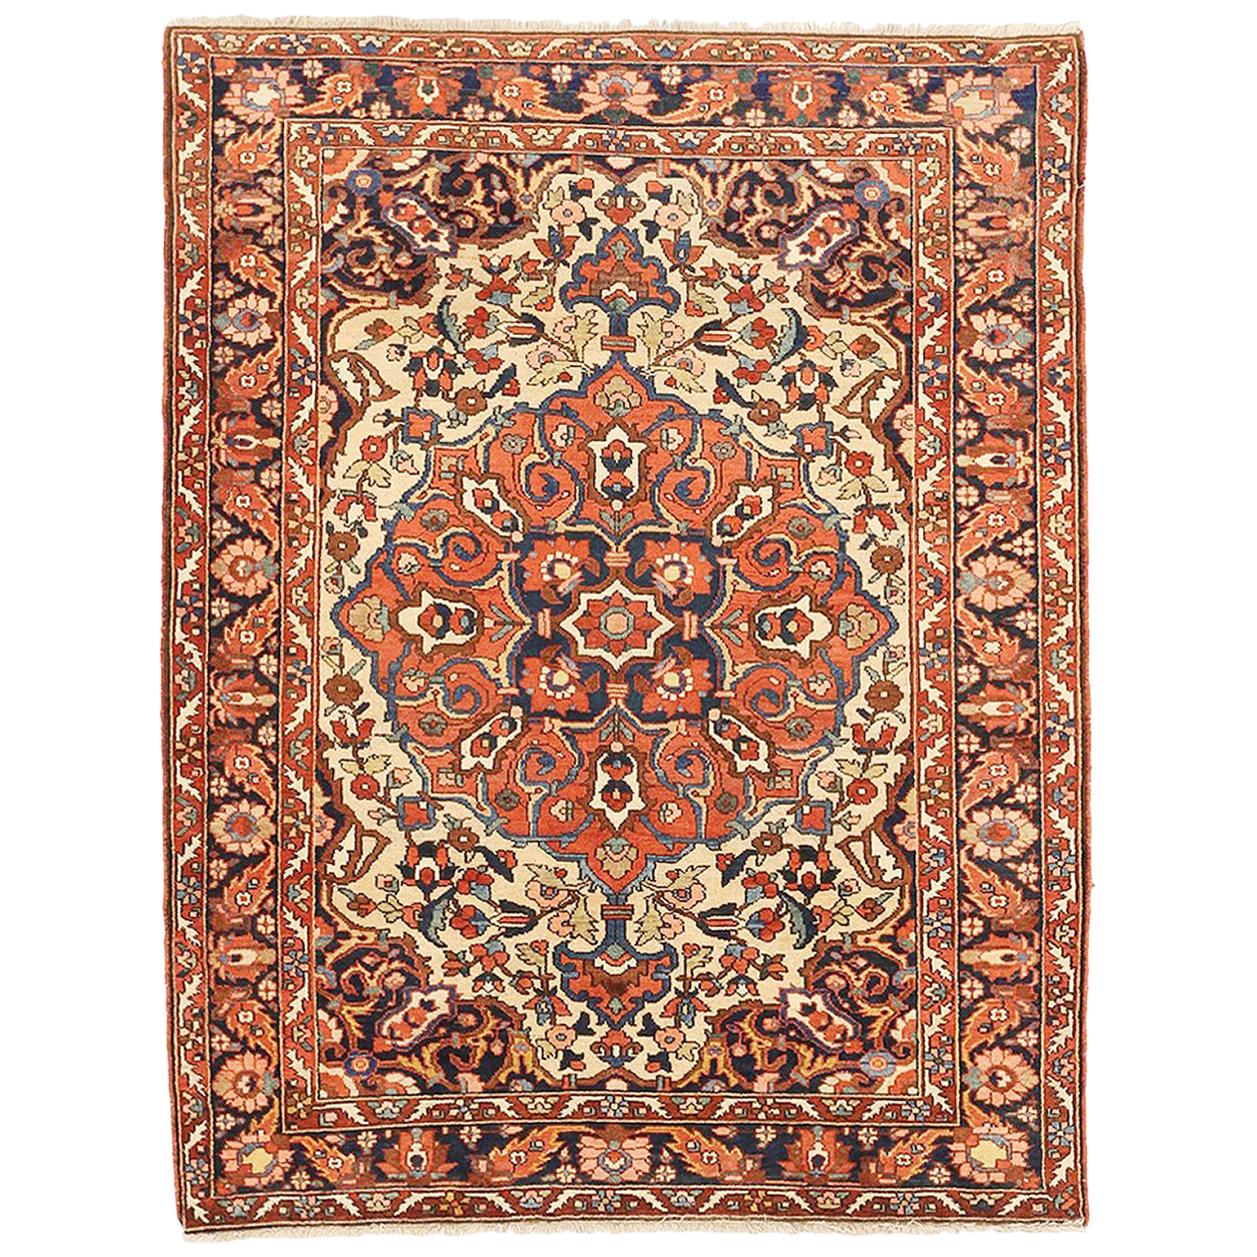 Antique Persian Bakhtiar Rug with Brown & Navy Floral Medallion at Center Field